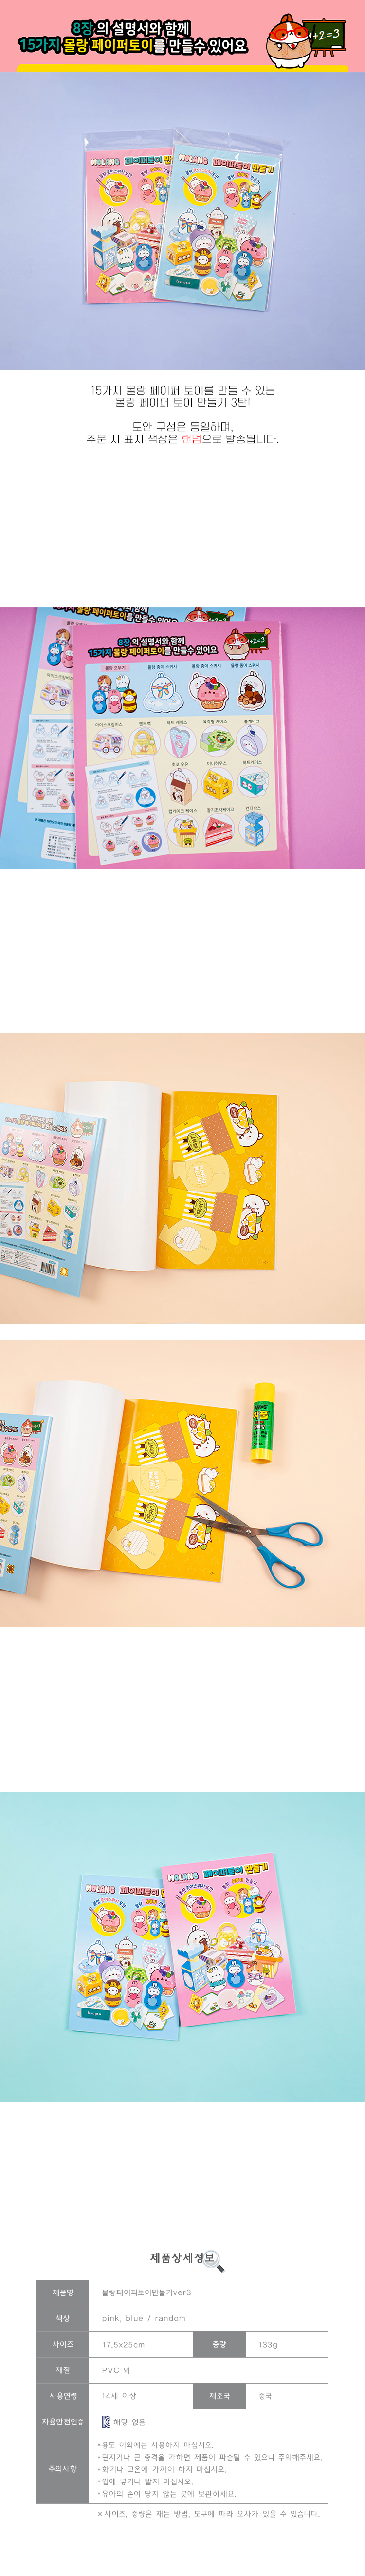 3000molang_paper_toy_ver3.jpg